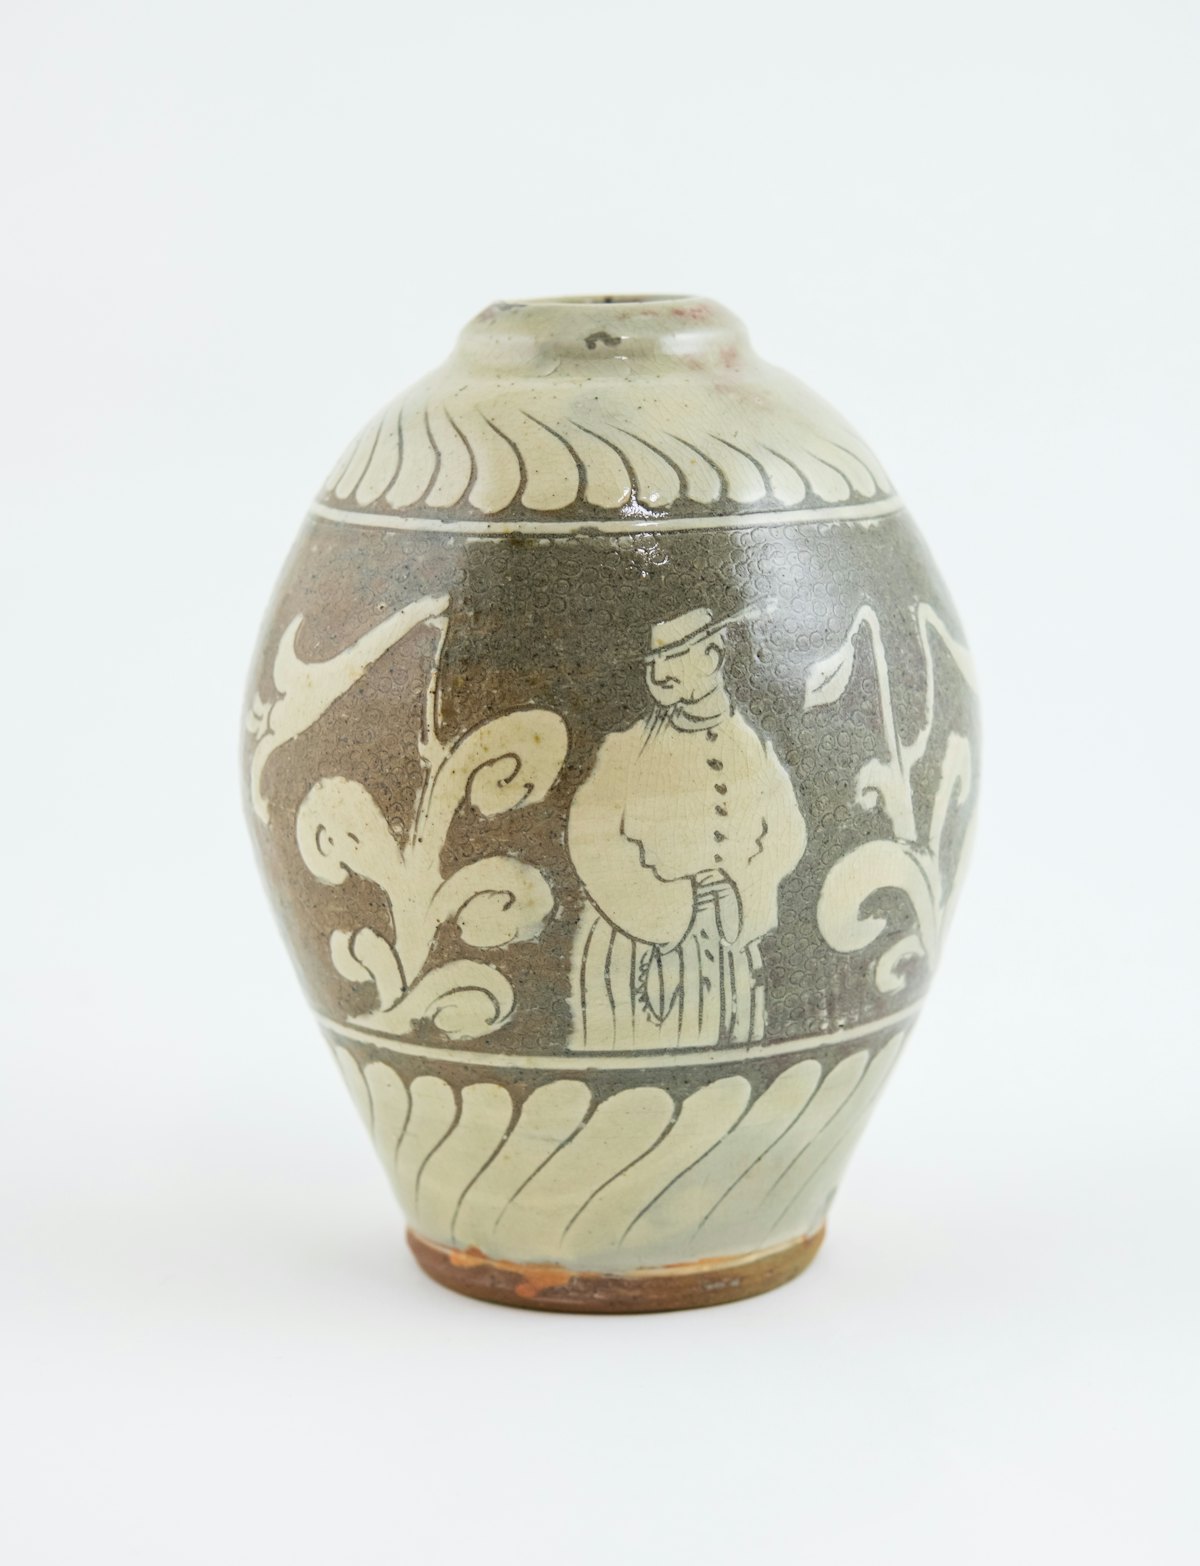 A vase by Bernard Leach, titled ‘Solomon among the Lilies’, on show in the Kai Althoff Goes with Bernard Leach exhibition at the Whitechapel Art Gallery, London. Image courtesy of Leicester Museums © Bernard Leach Estate.